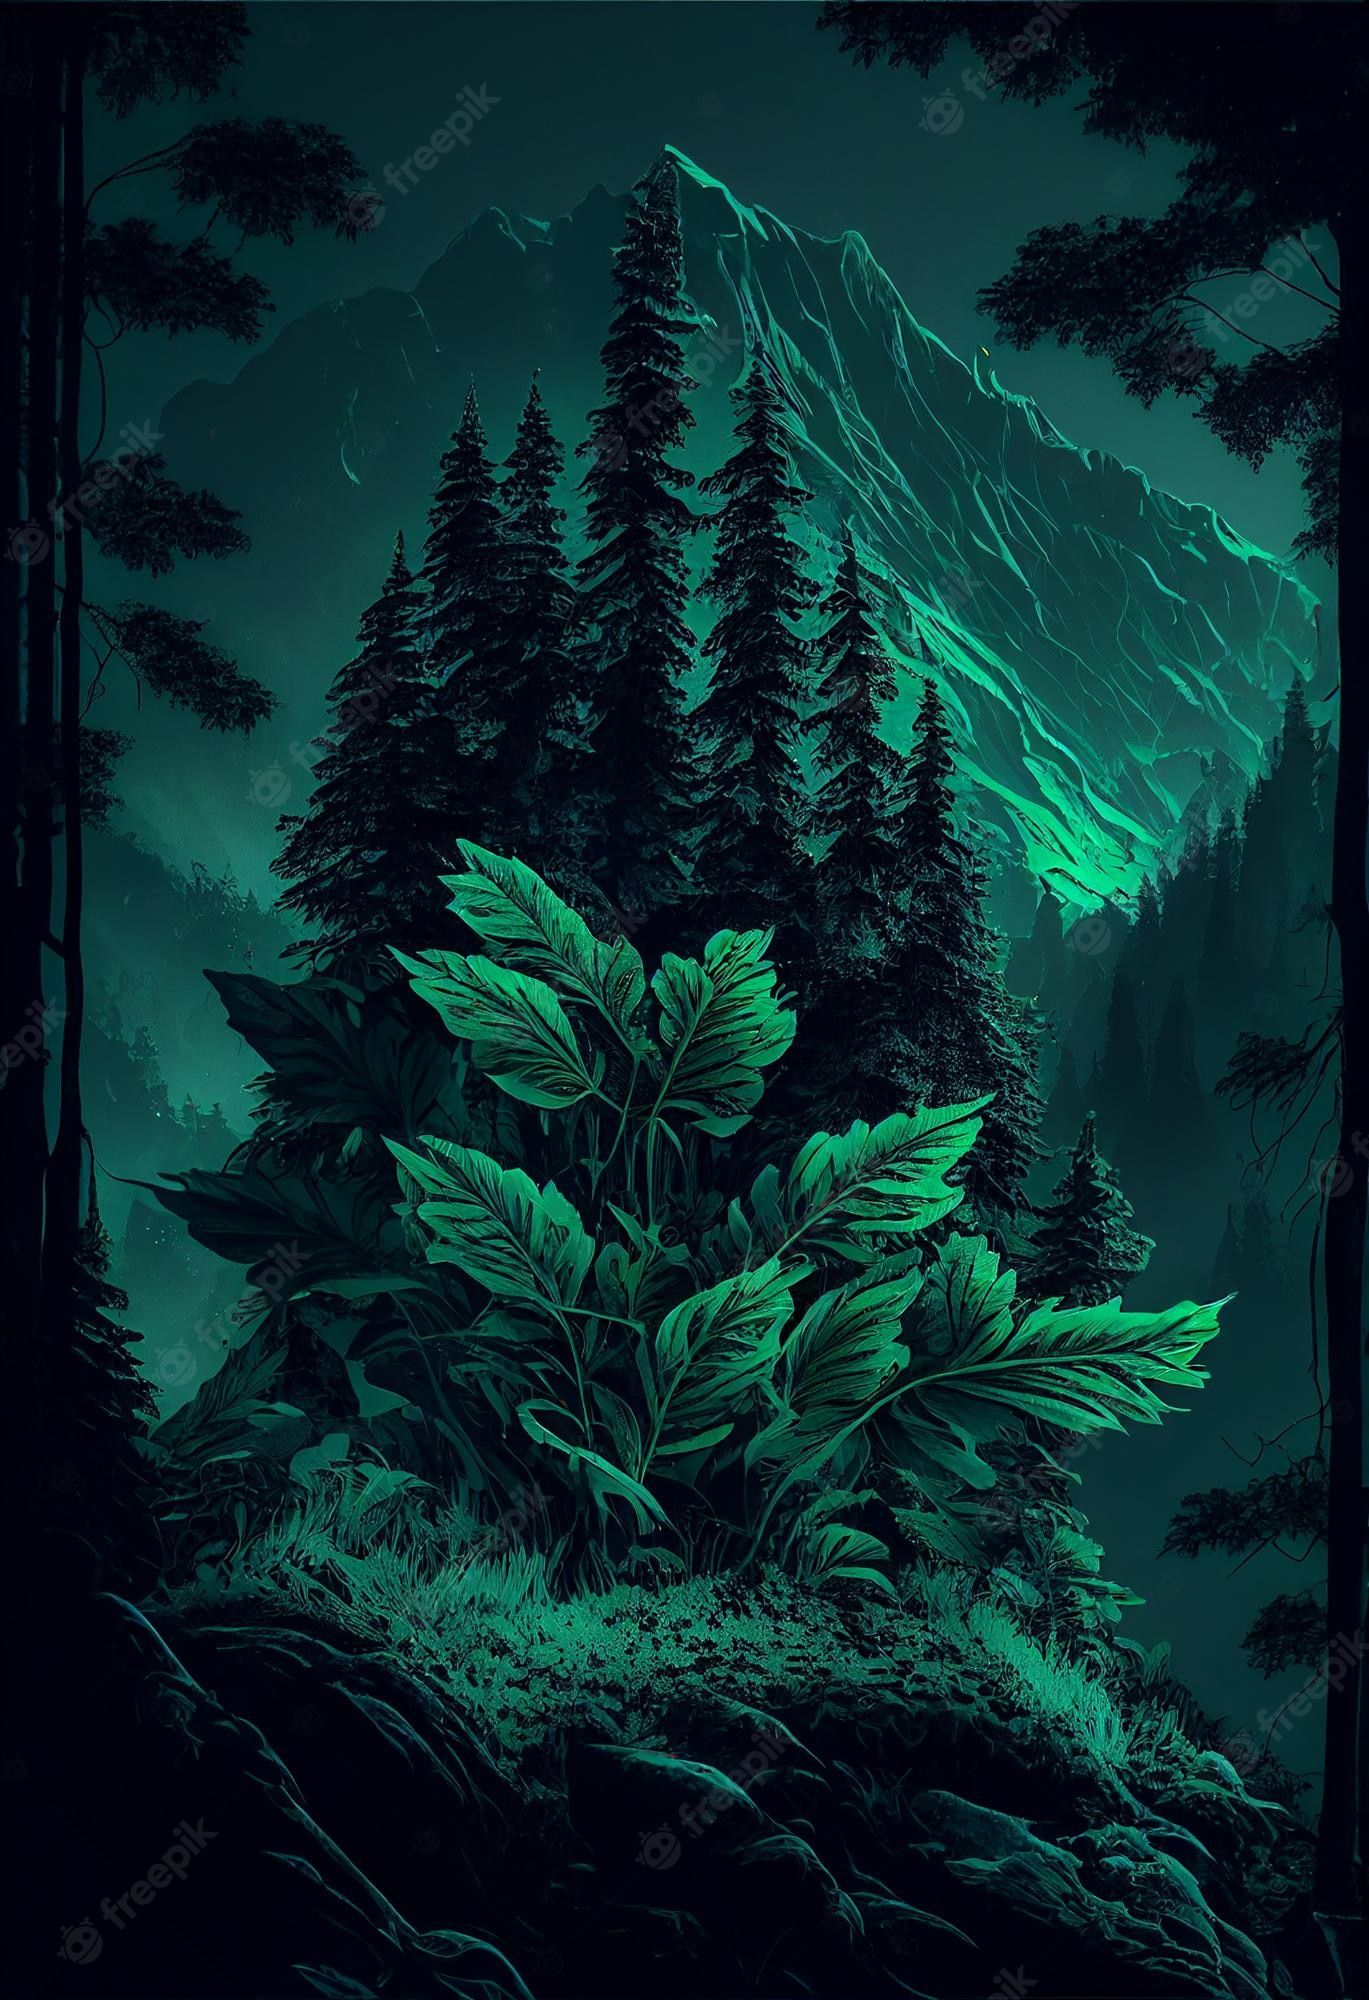 Aesthetic Forest Image